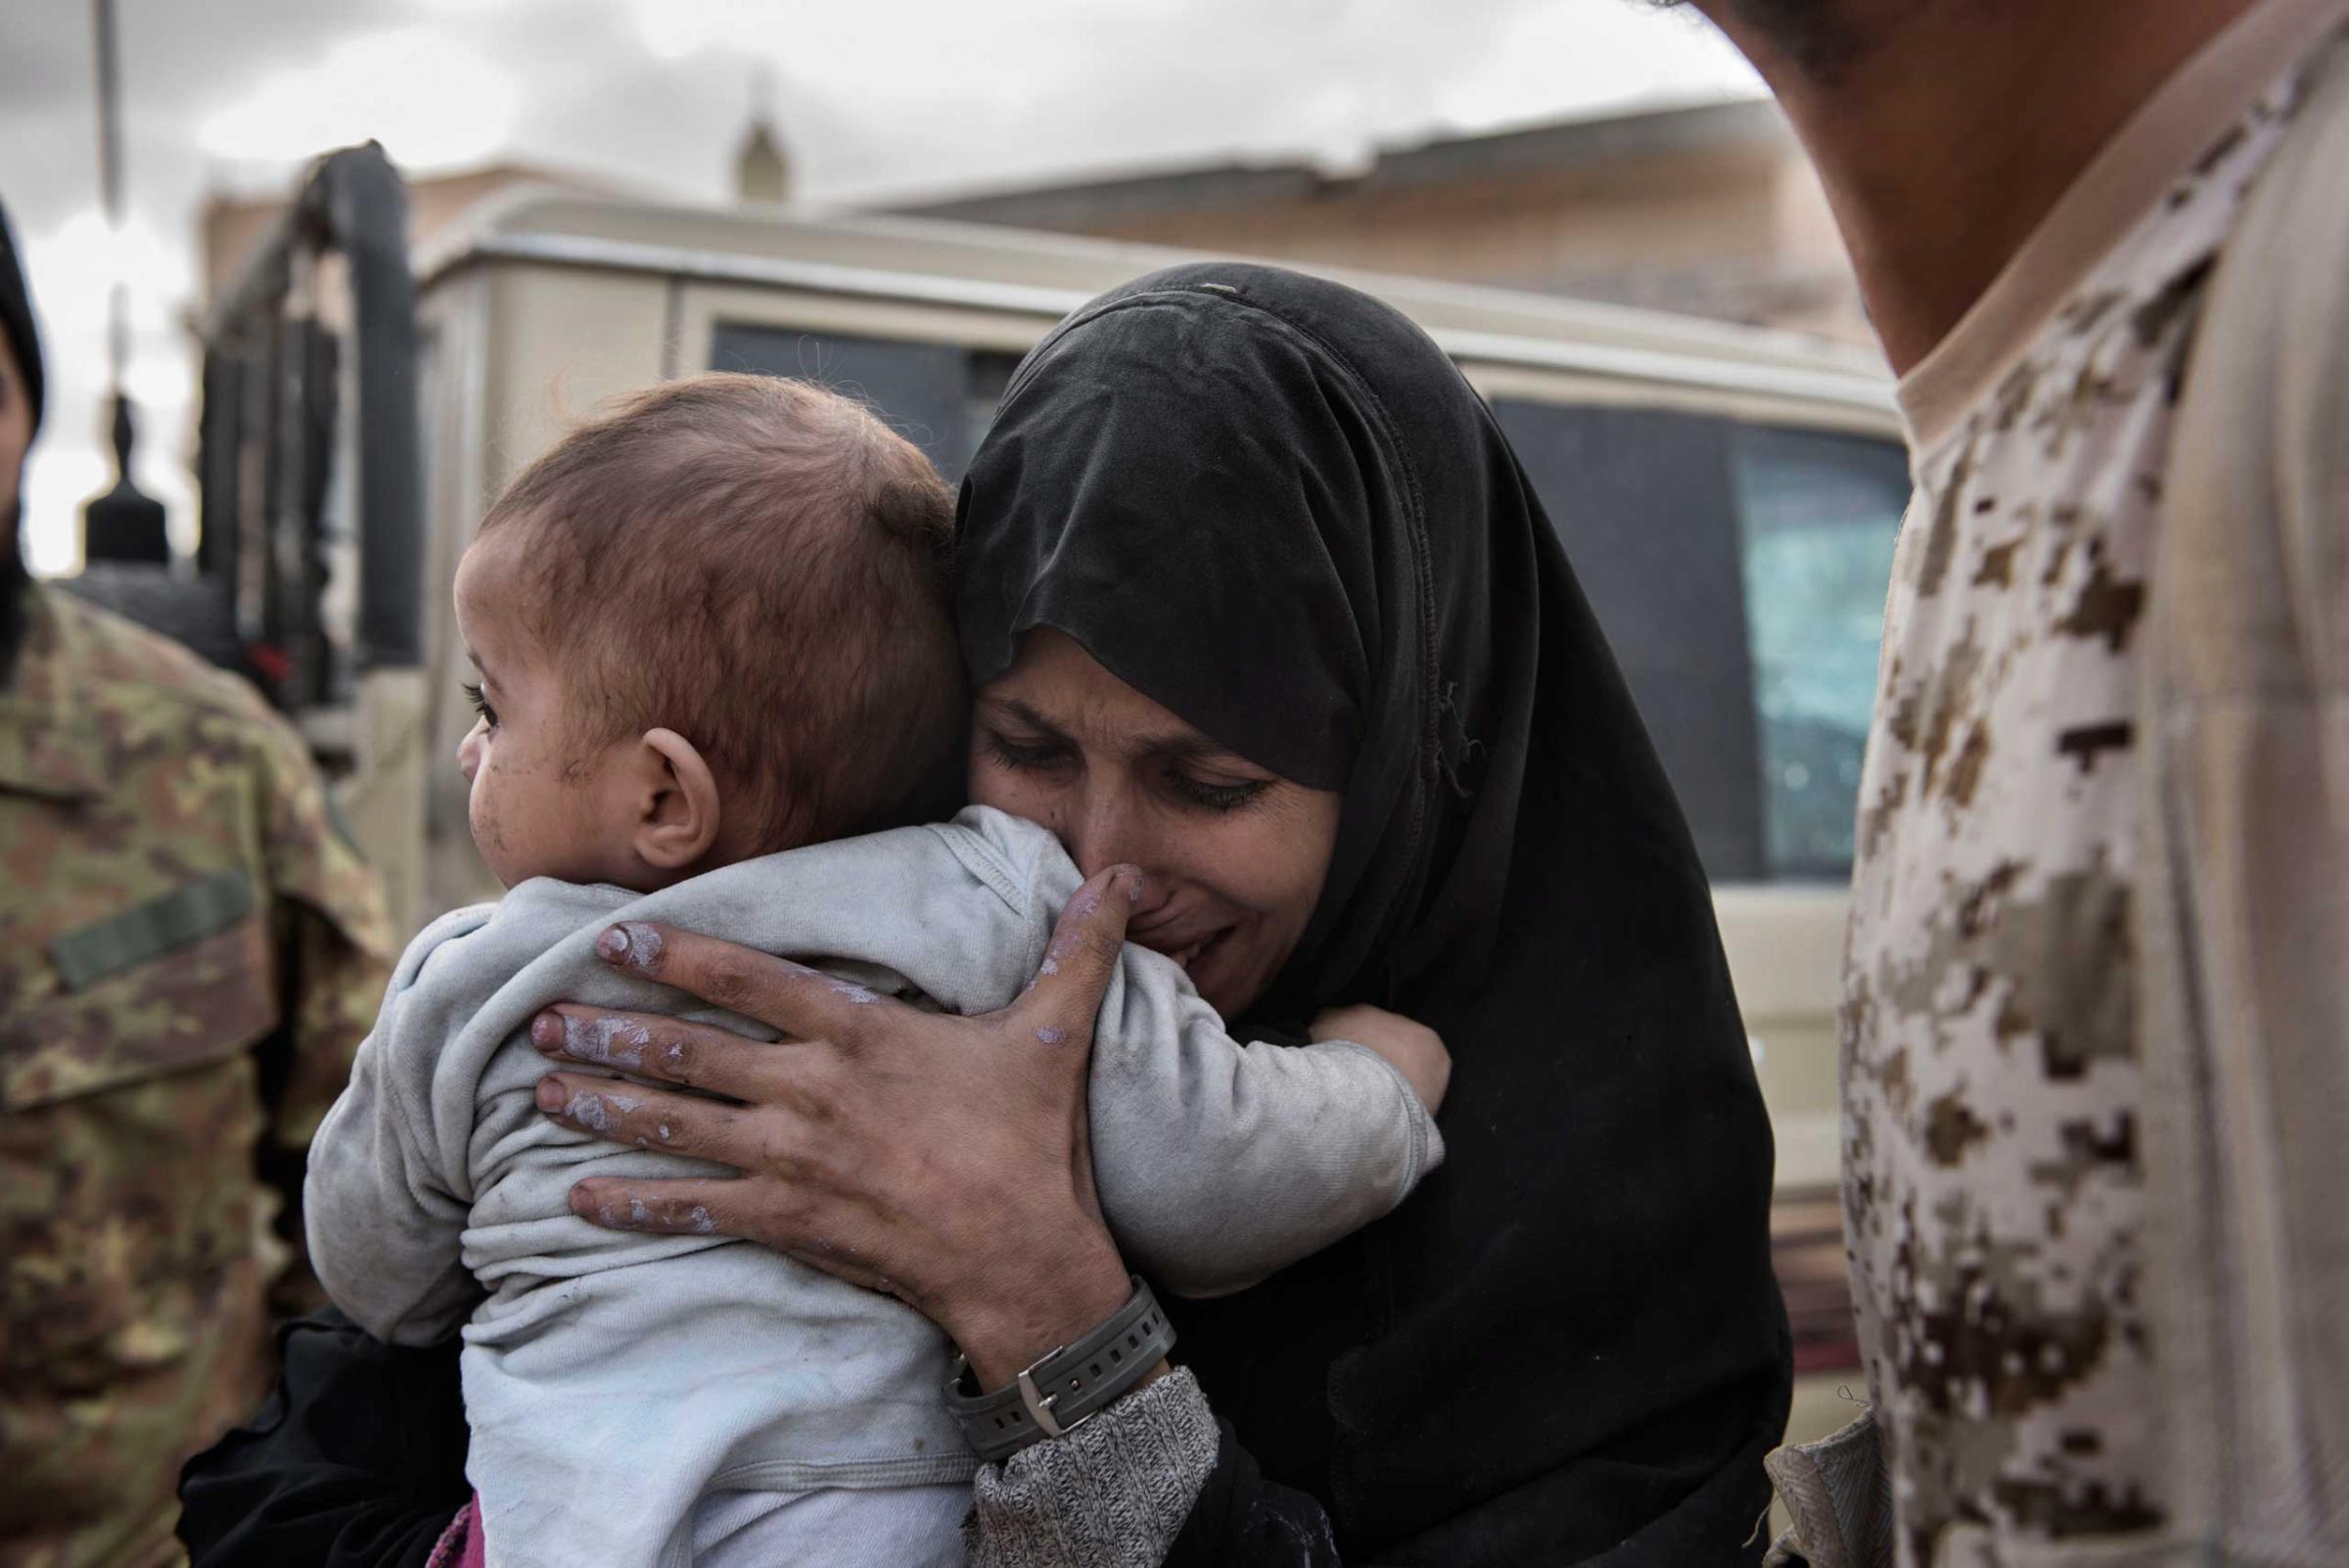 Libya, Sirte: A woman and a child, allegedly IS family members, are seen after fighters of the Libyan forces affiliated to the Tripoli government took them out of the fighting area in Al Jiza neighbourhood  in Sirte on December 1, 2016. Alessio Romenzi